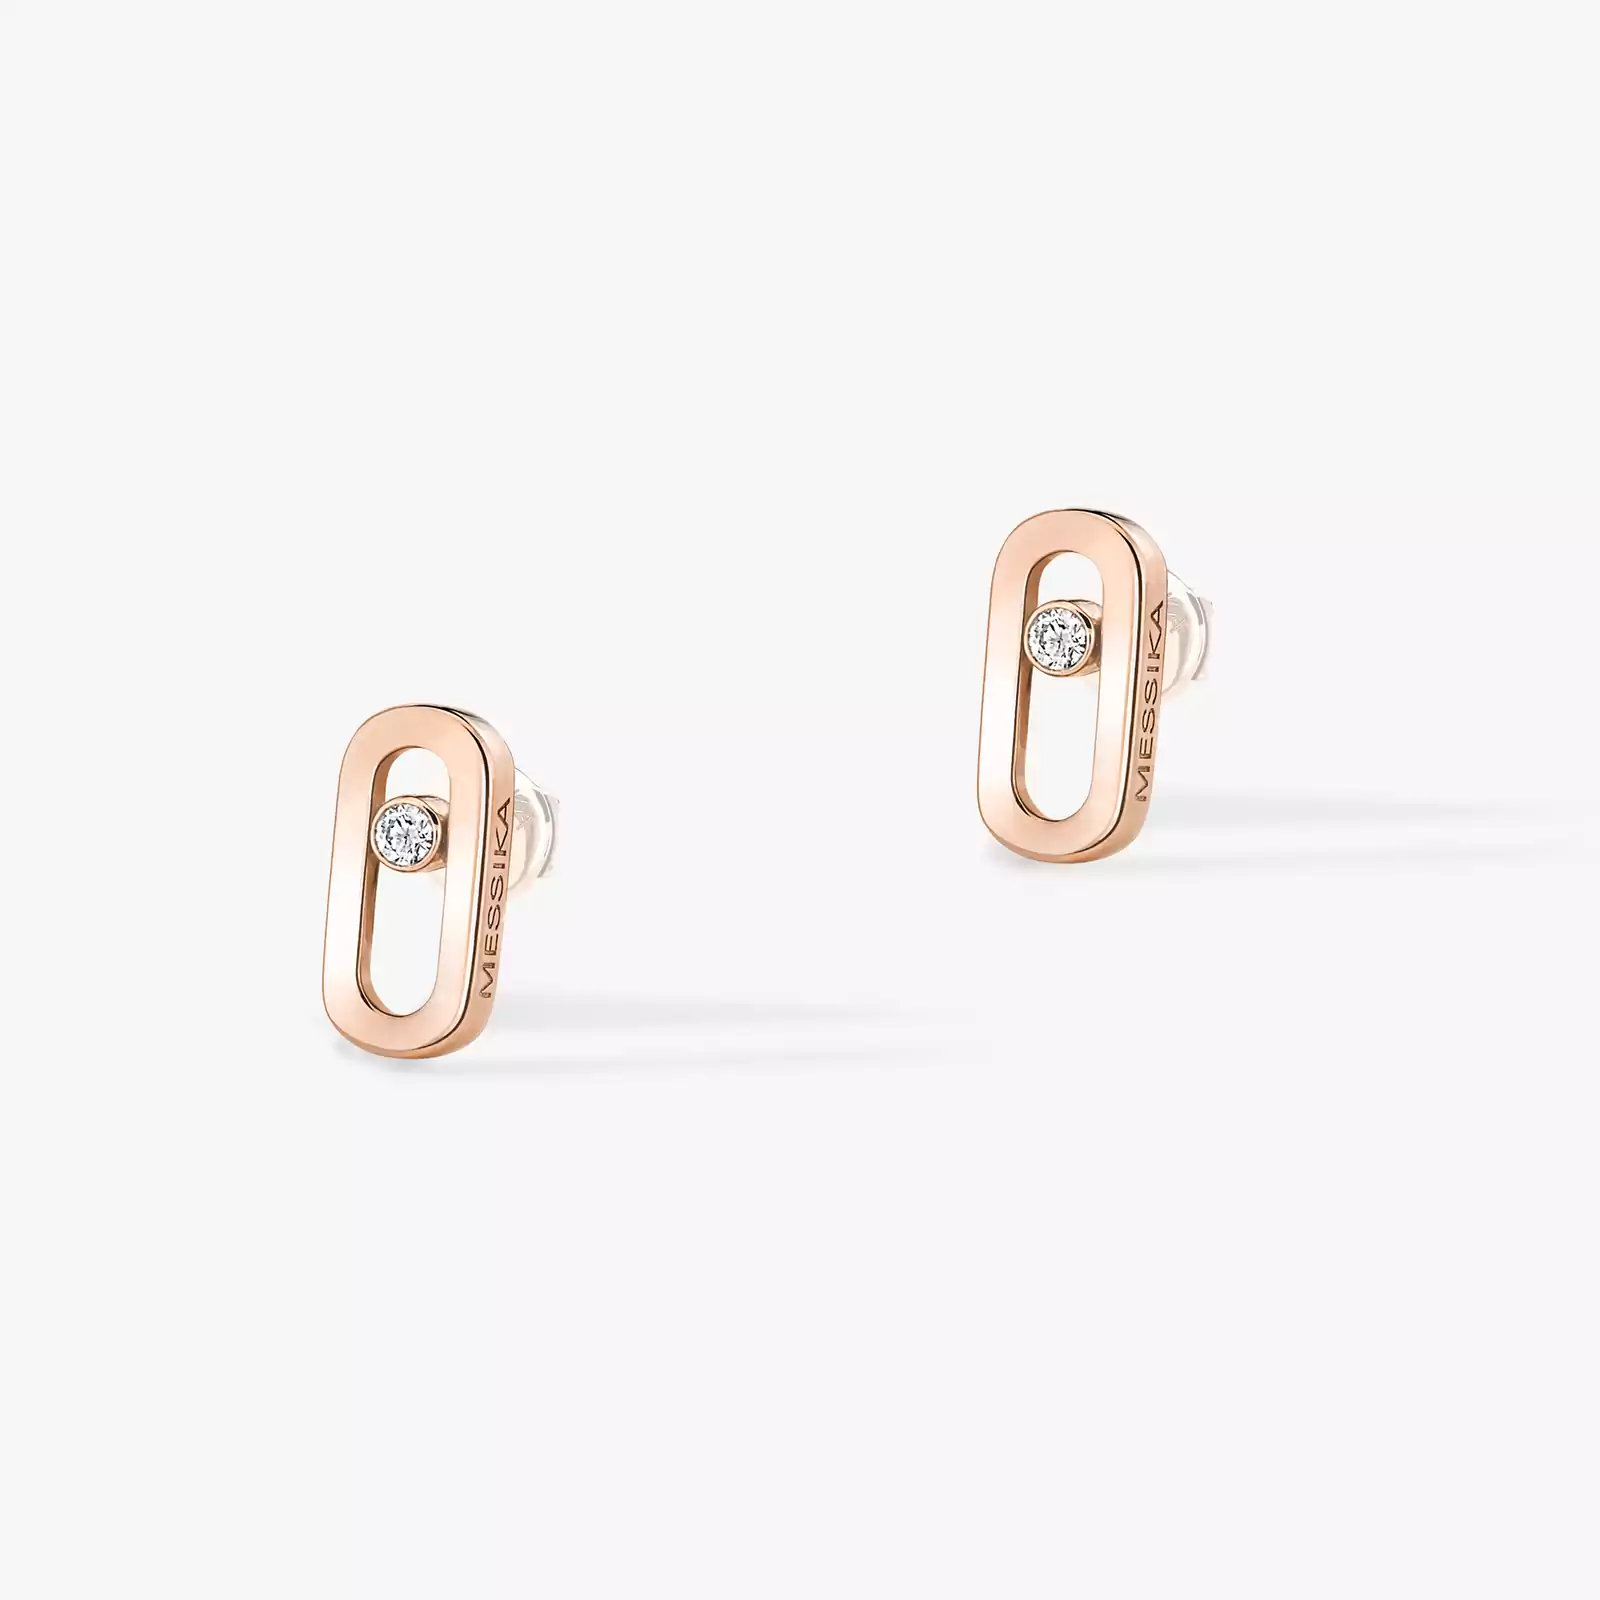 Gold Move Uno Stud Earrings Pink Gold For Her Diamond Earrings 12305-PG